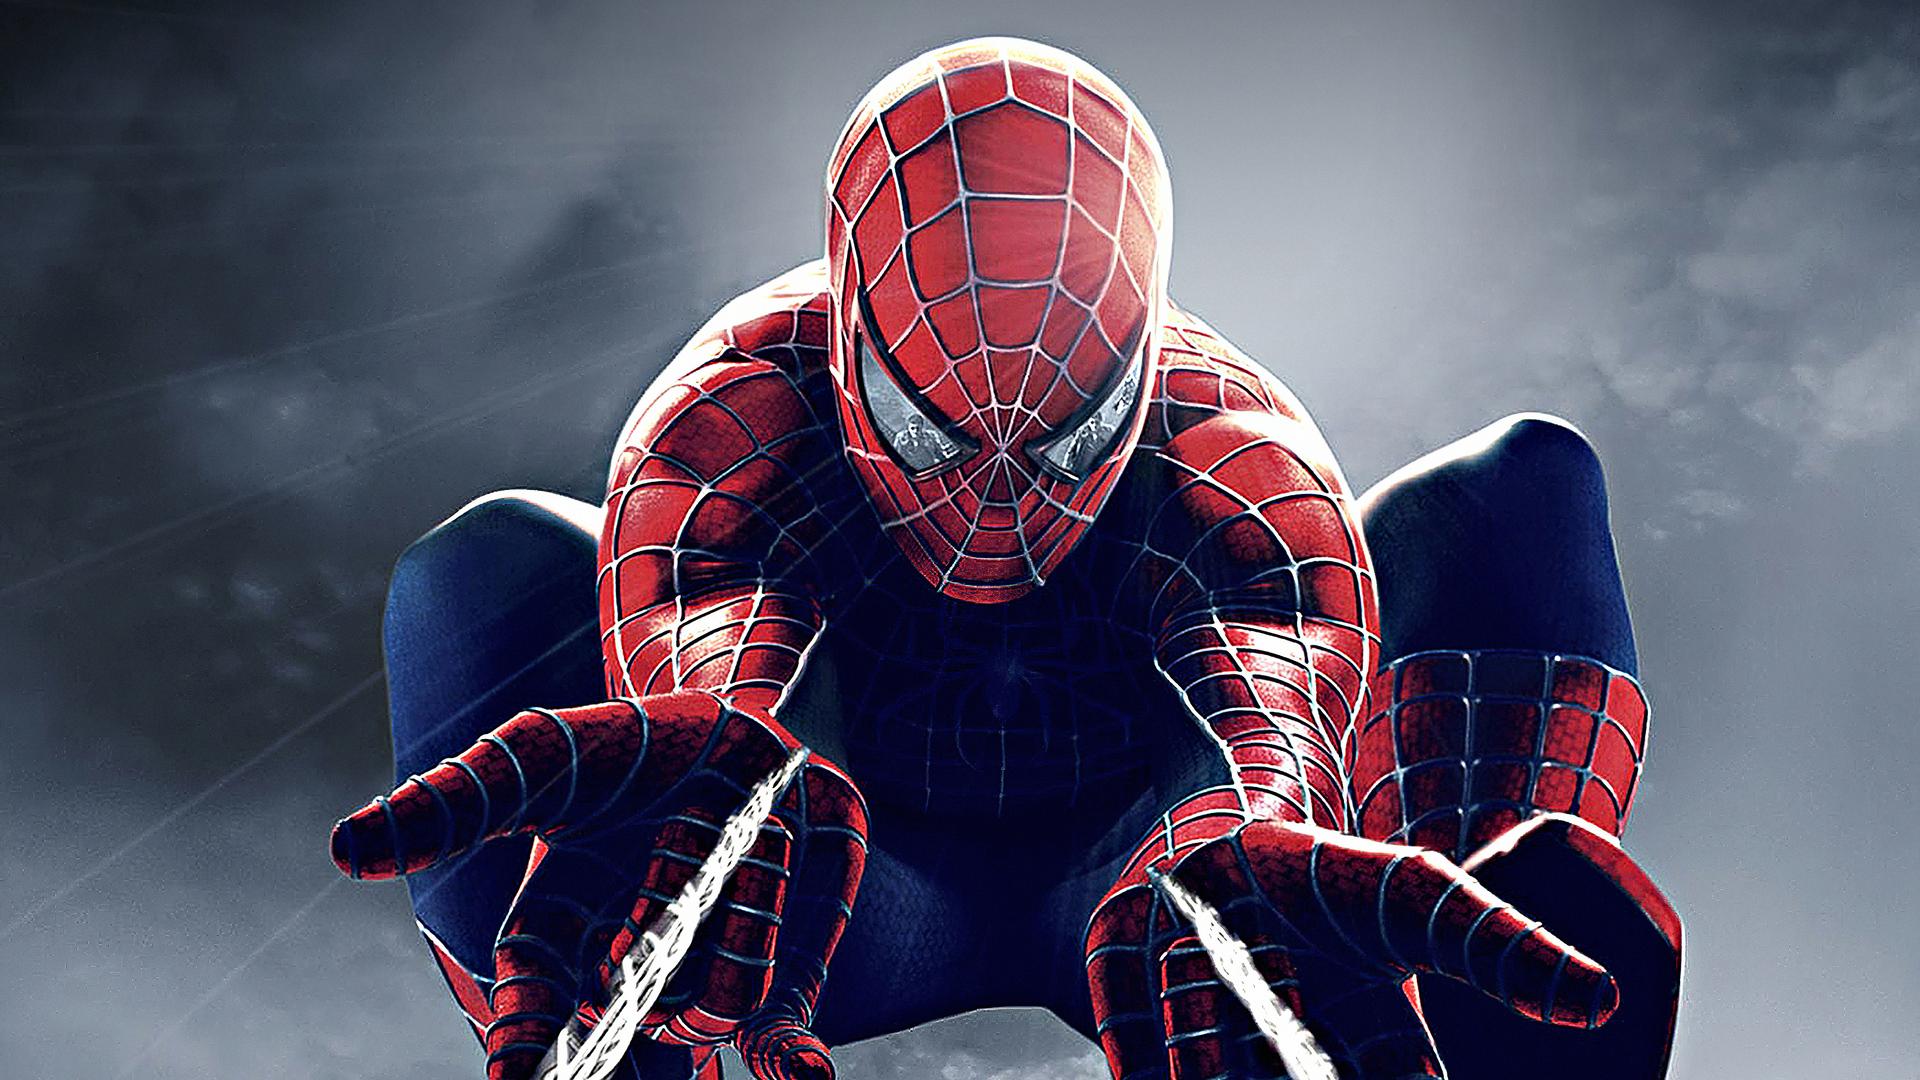 Spiderman HD Wallpapers 73 images